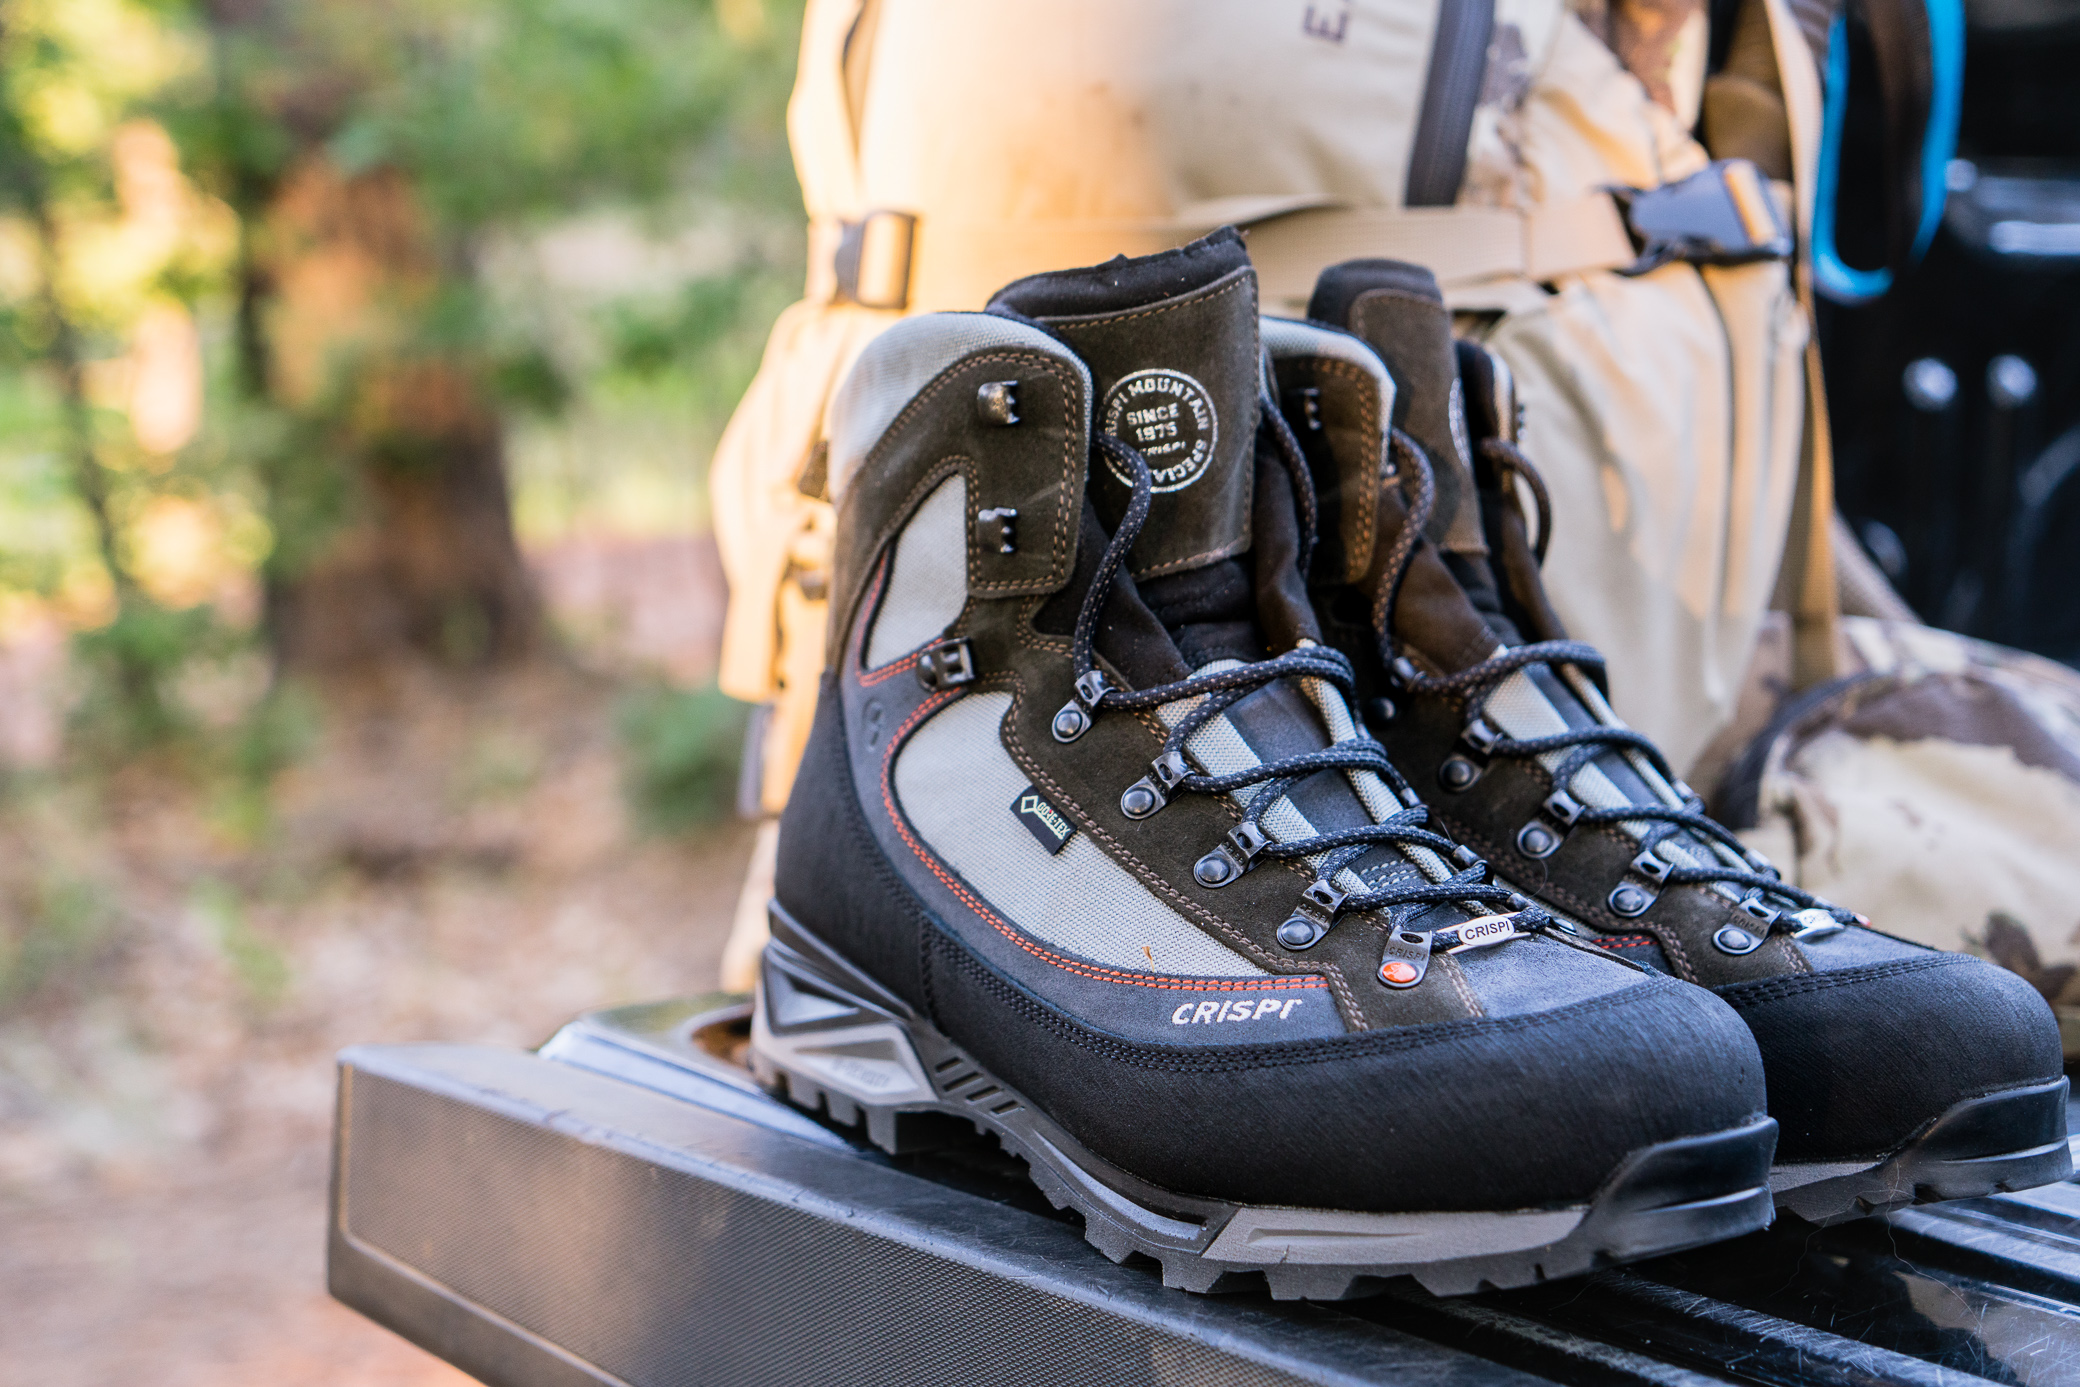 First Impressions of New Boots: Crispi Colorado - Dialed In Hunter